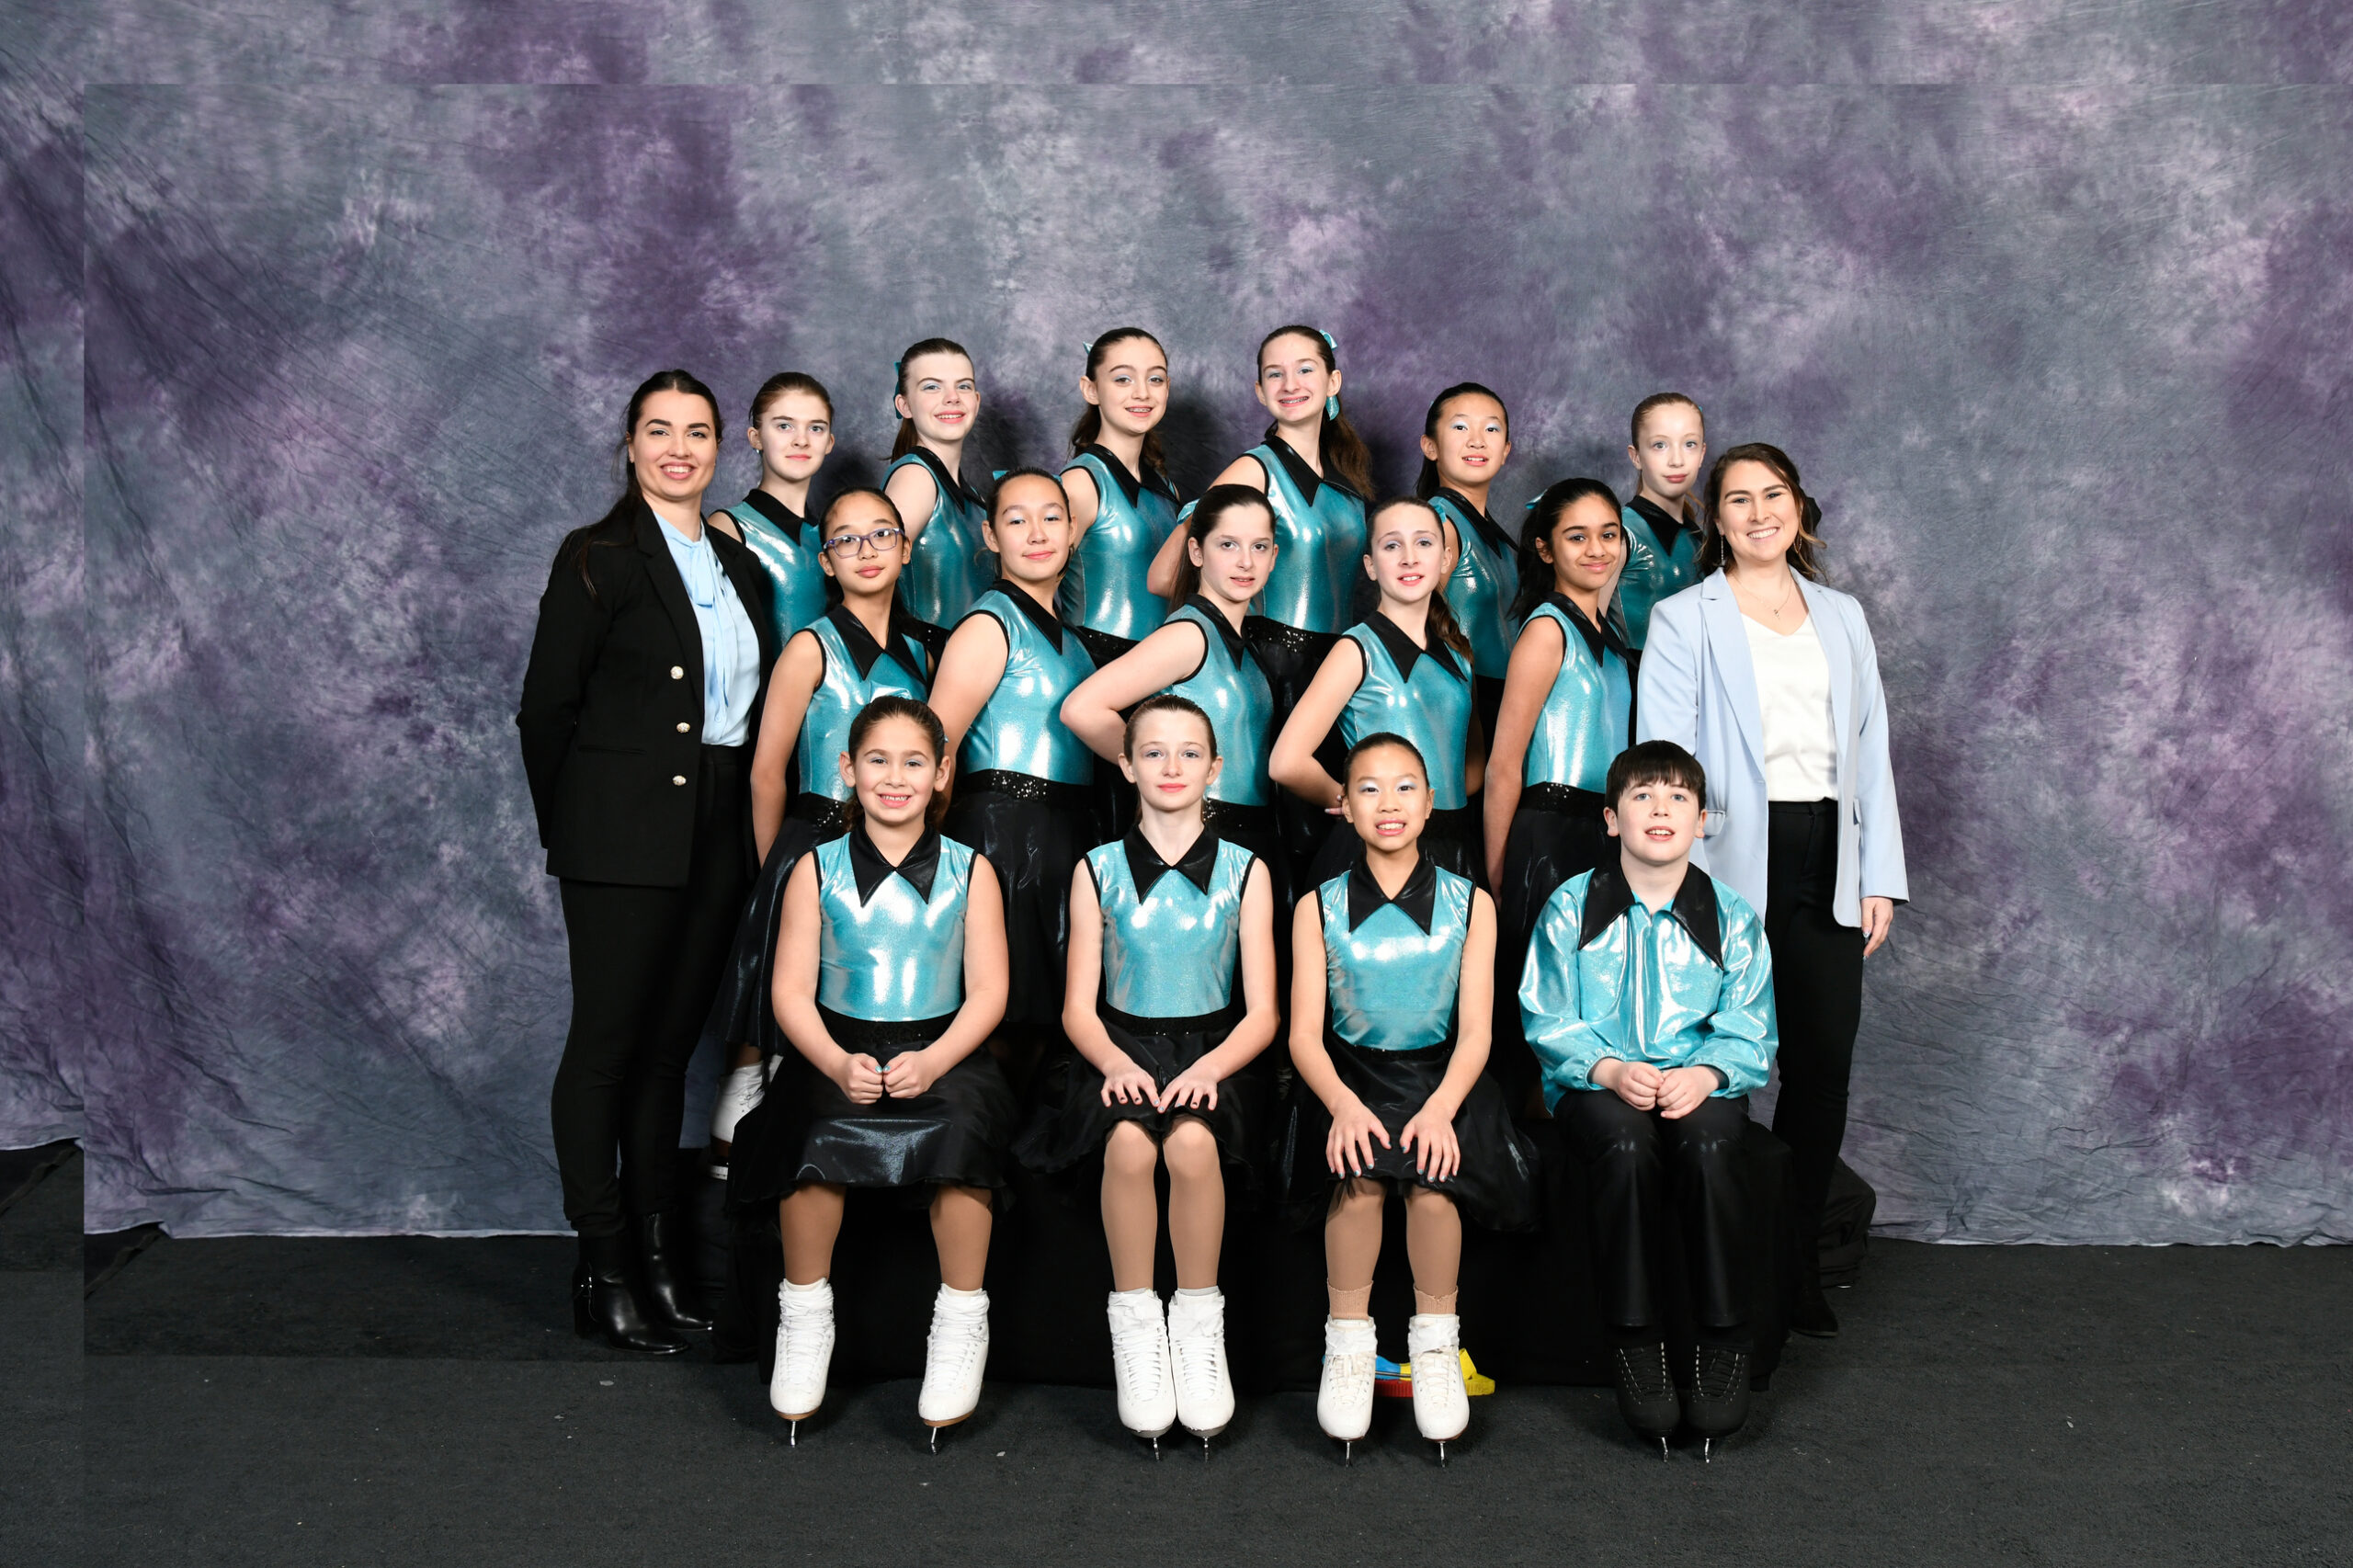 Midwestern-Pacific Coast Synchronized Sectional Skating 2023